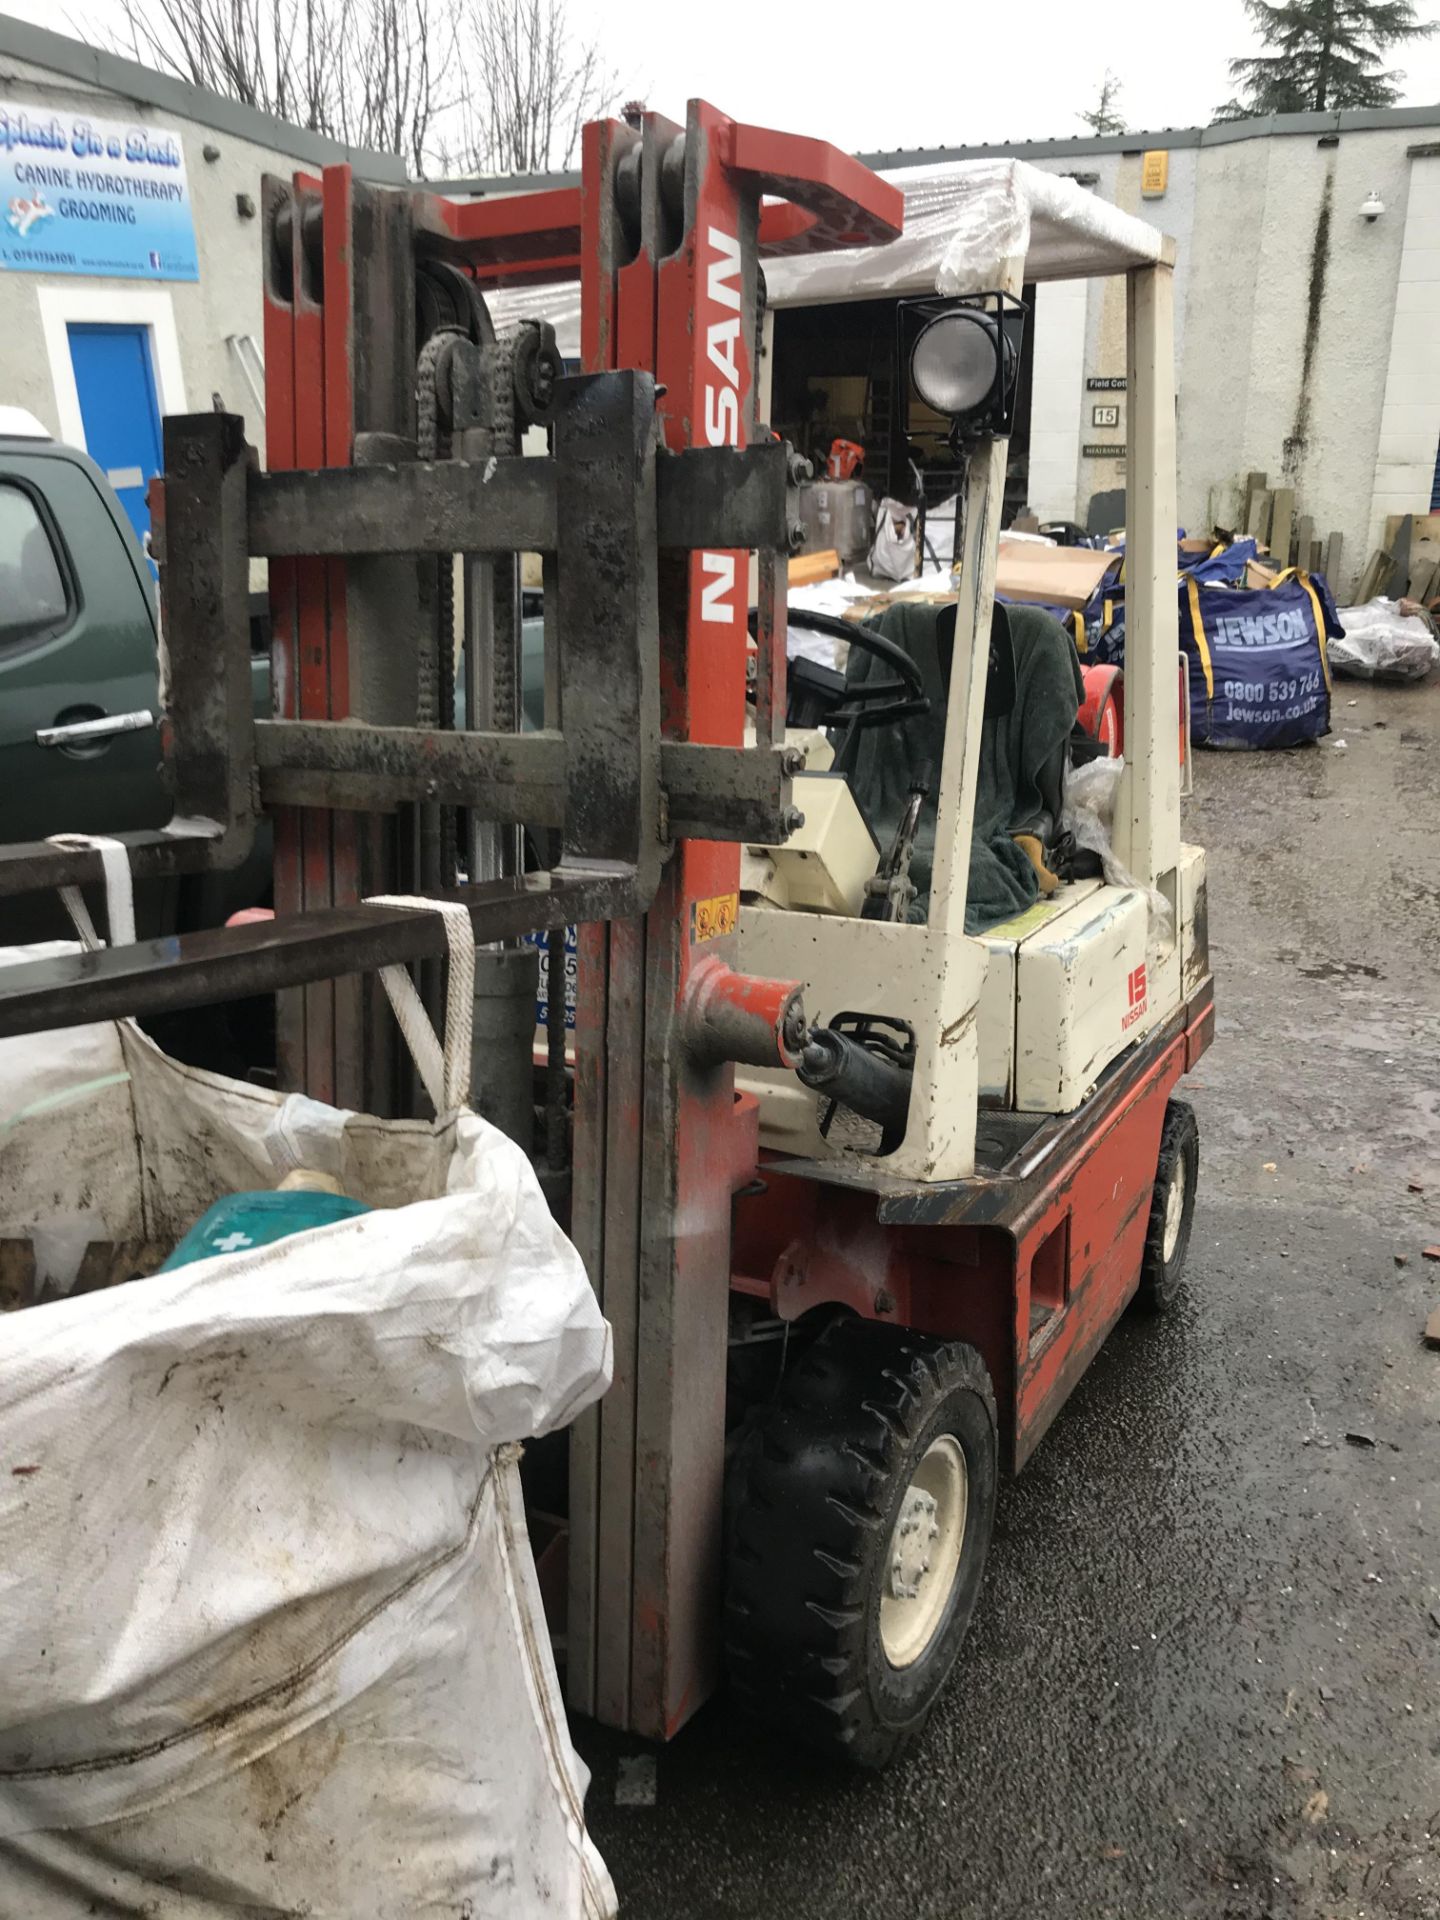 Nissan PH01A15U 1500KG LPG FORK LIFT TRUCK, chassis no. PH01E2000012, indicated hours 1412 (at - Image 3 of 7